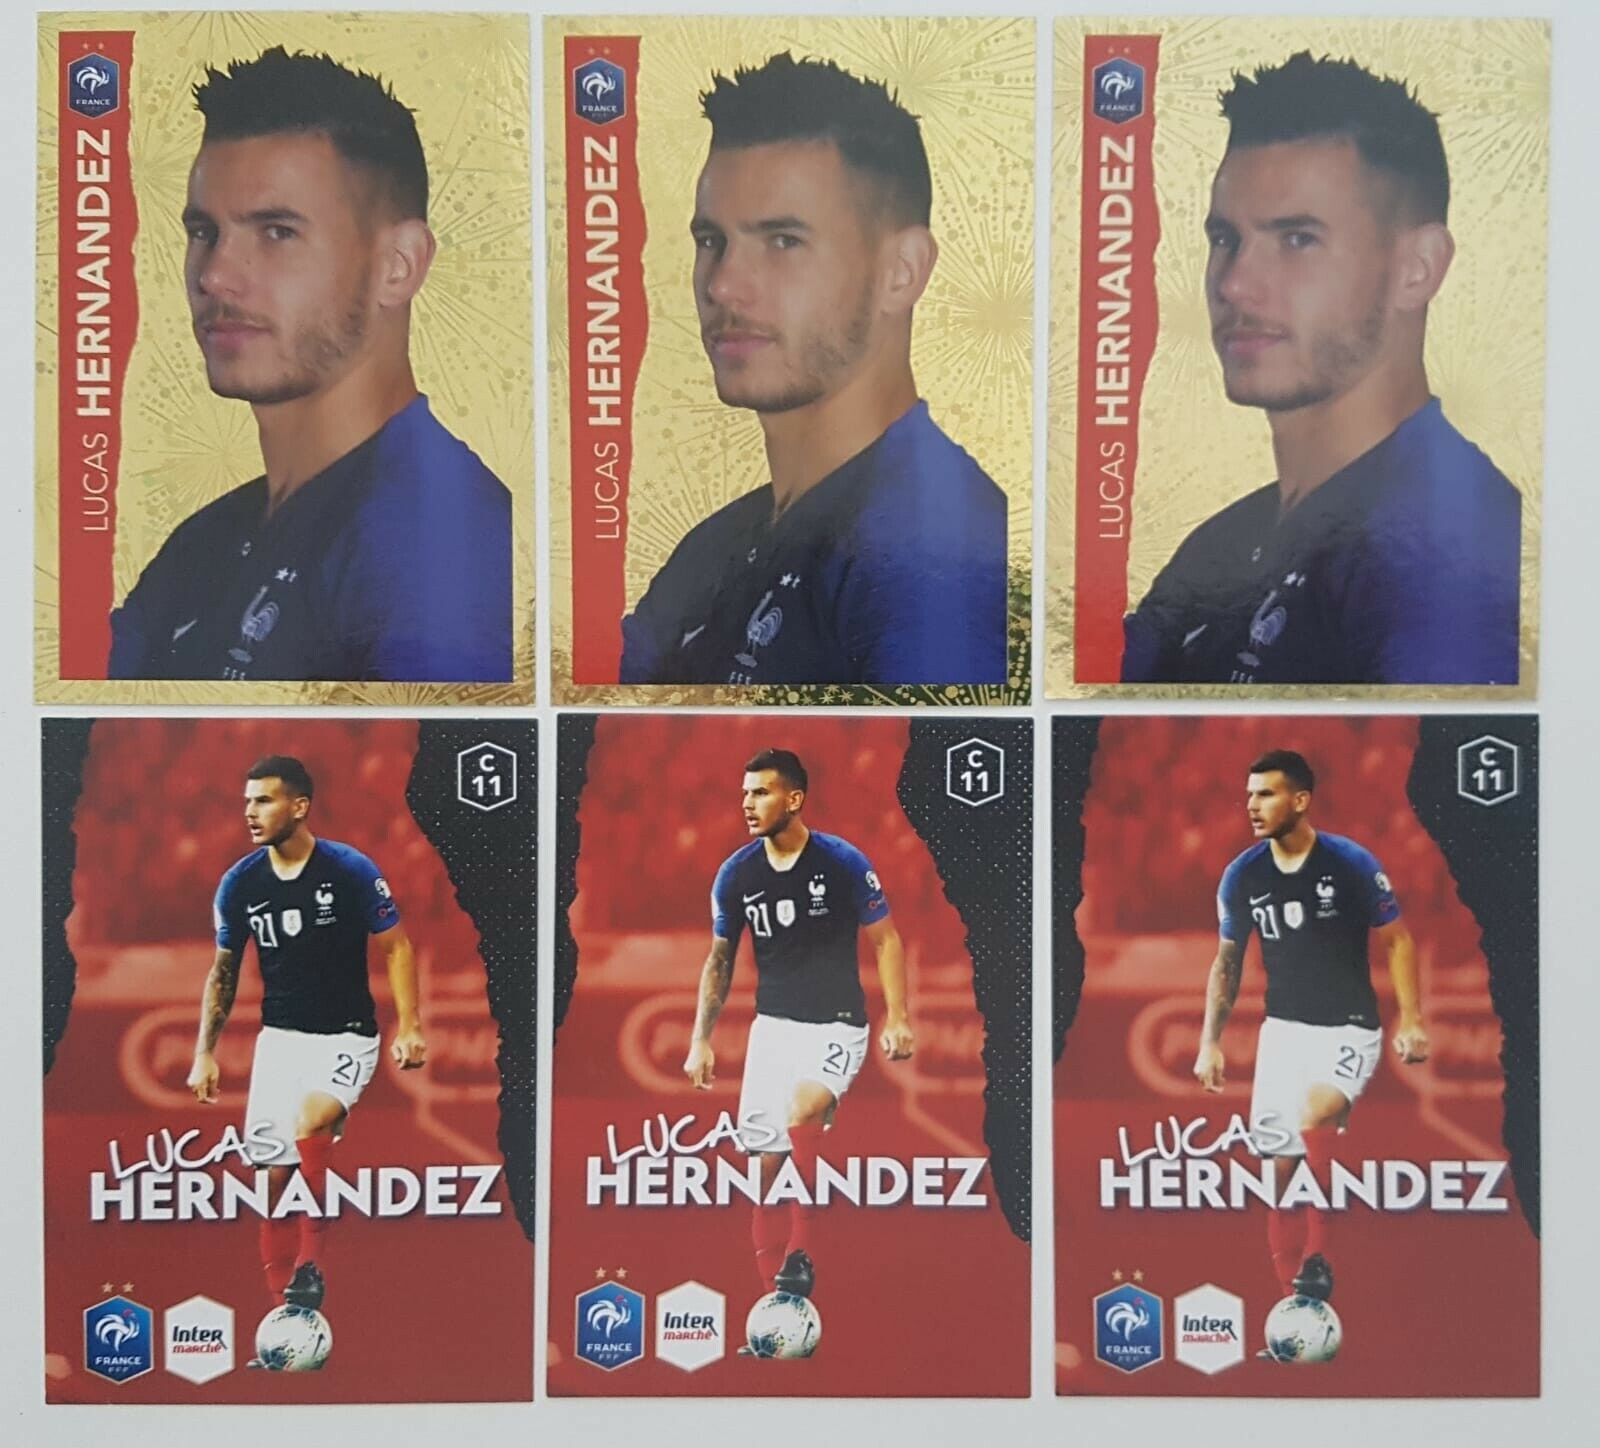 2020 Lucas Hernandez EURO PANINI FAMILY Gold STICKERS & CARDS France 